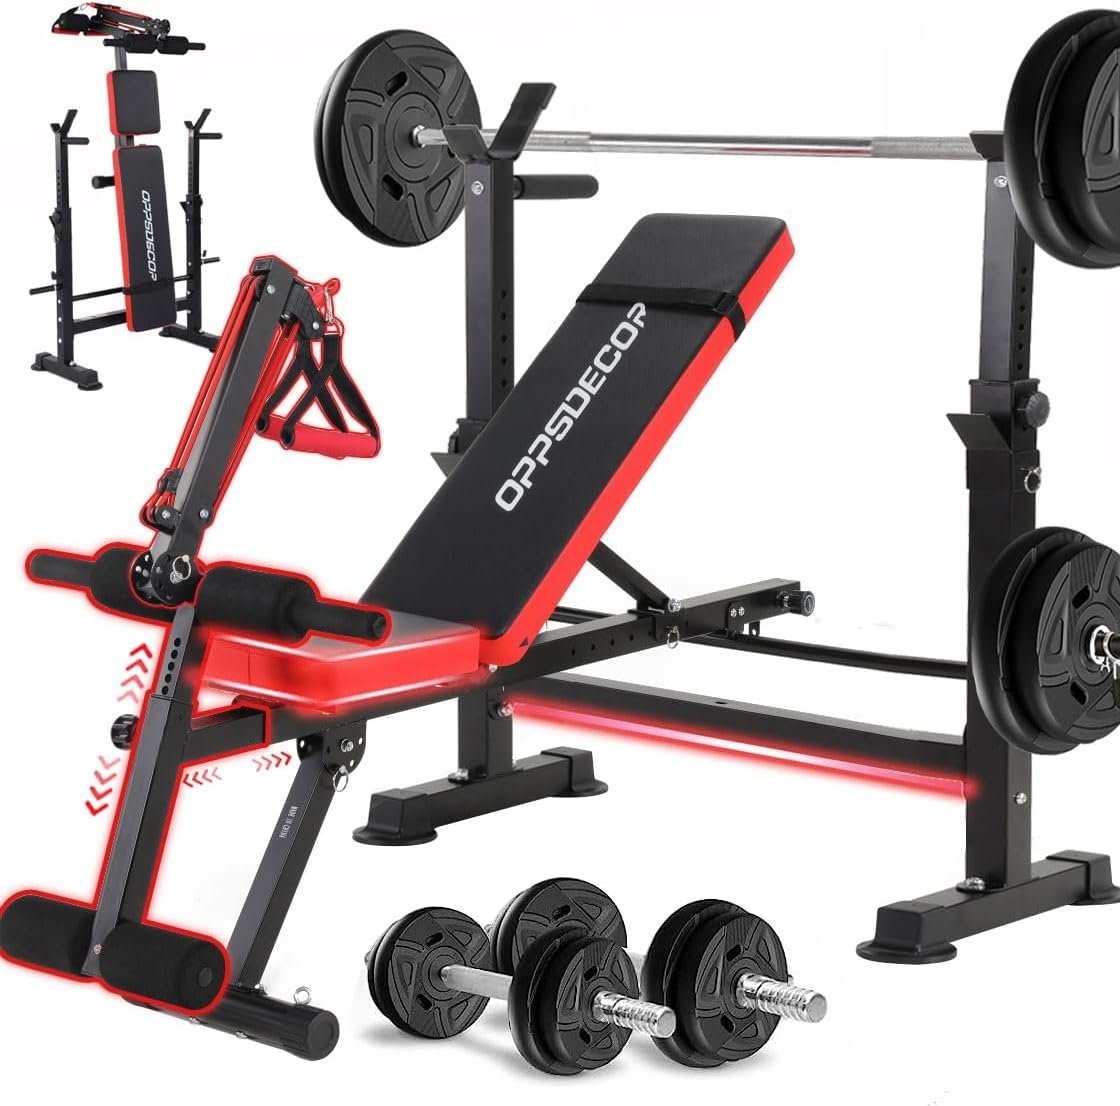 OPPSDECOR 6 in 1 Weight Bench Set Review